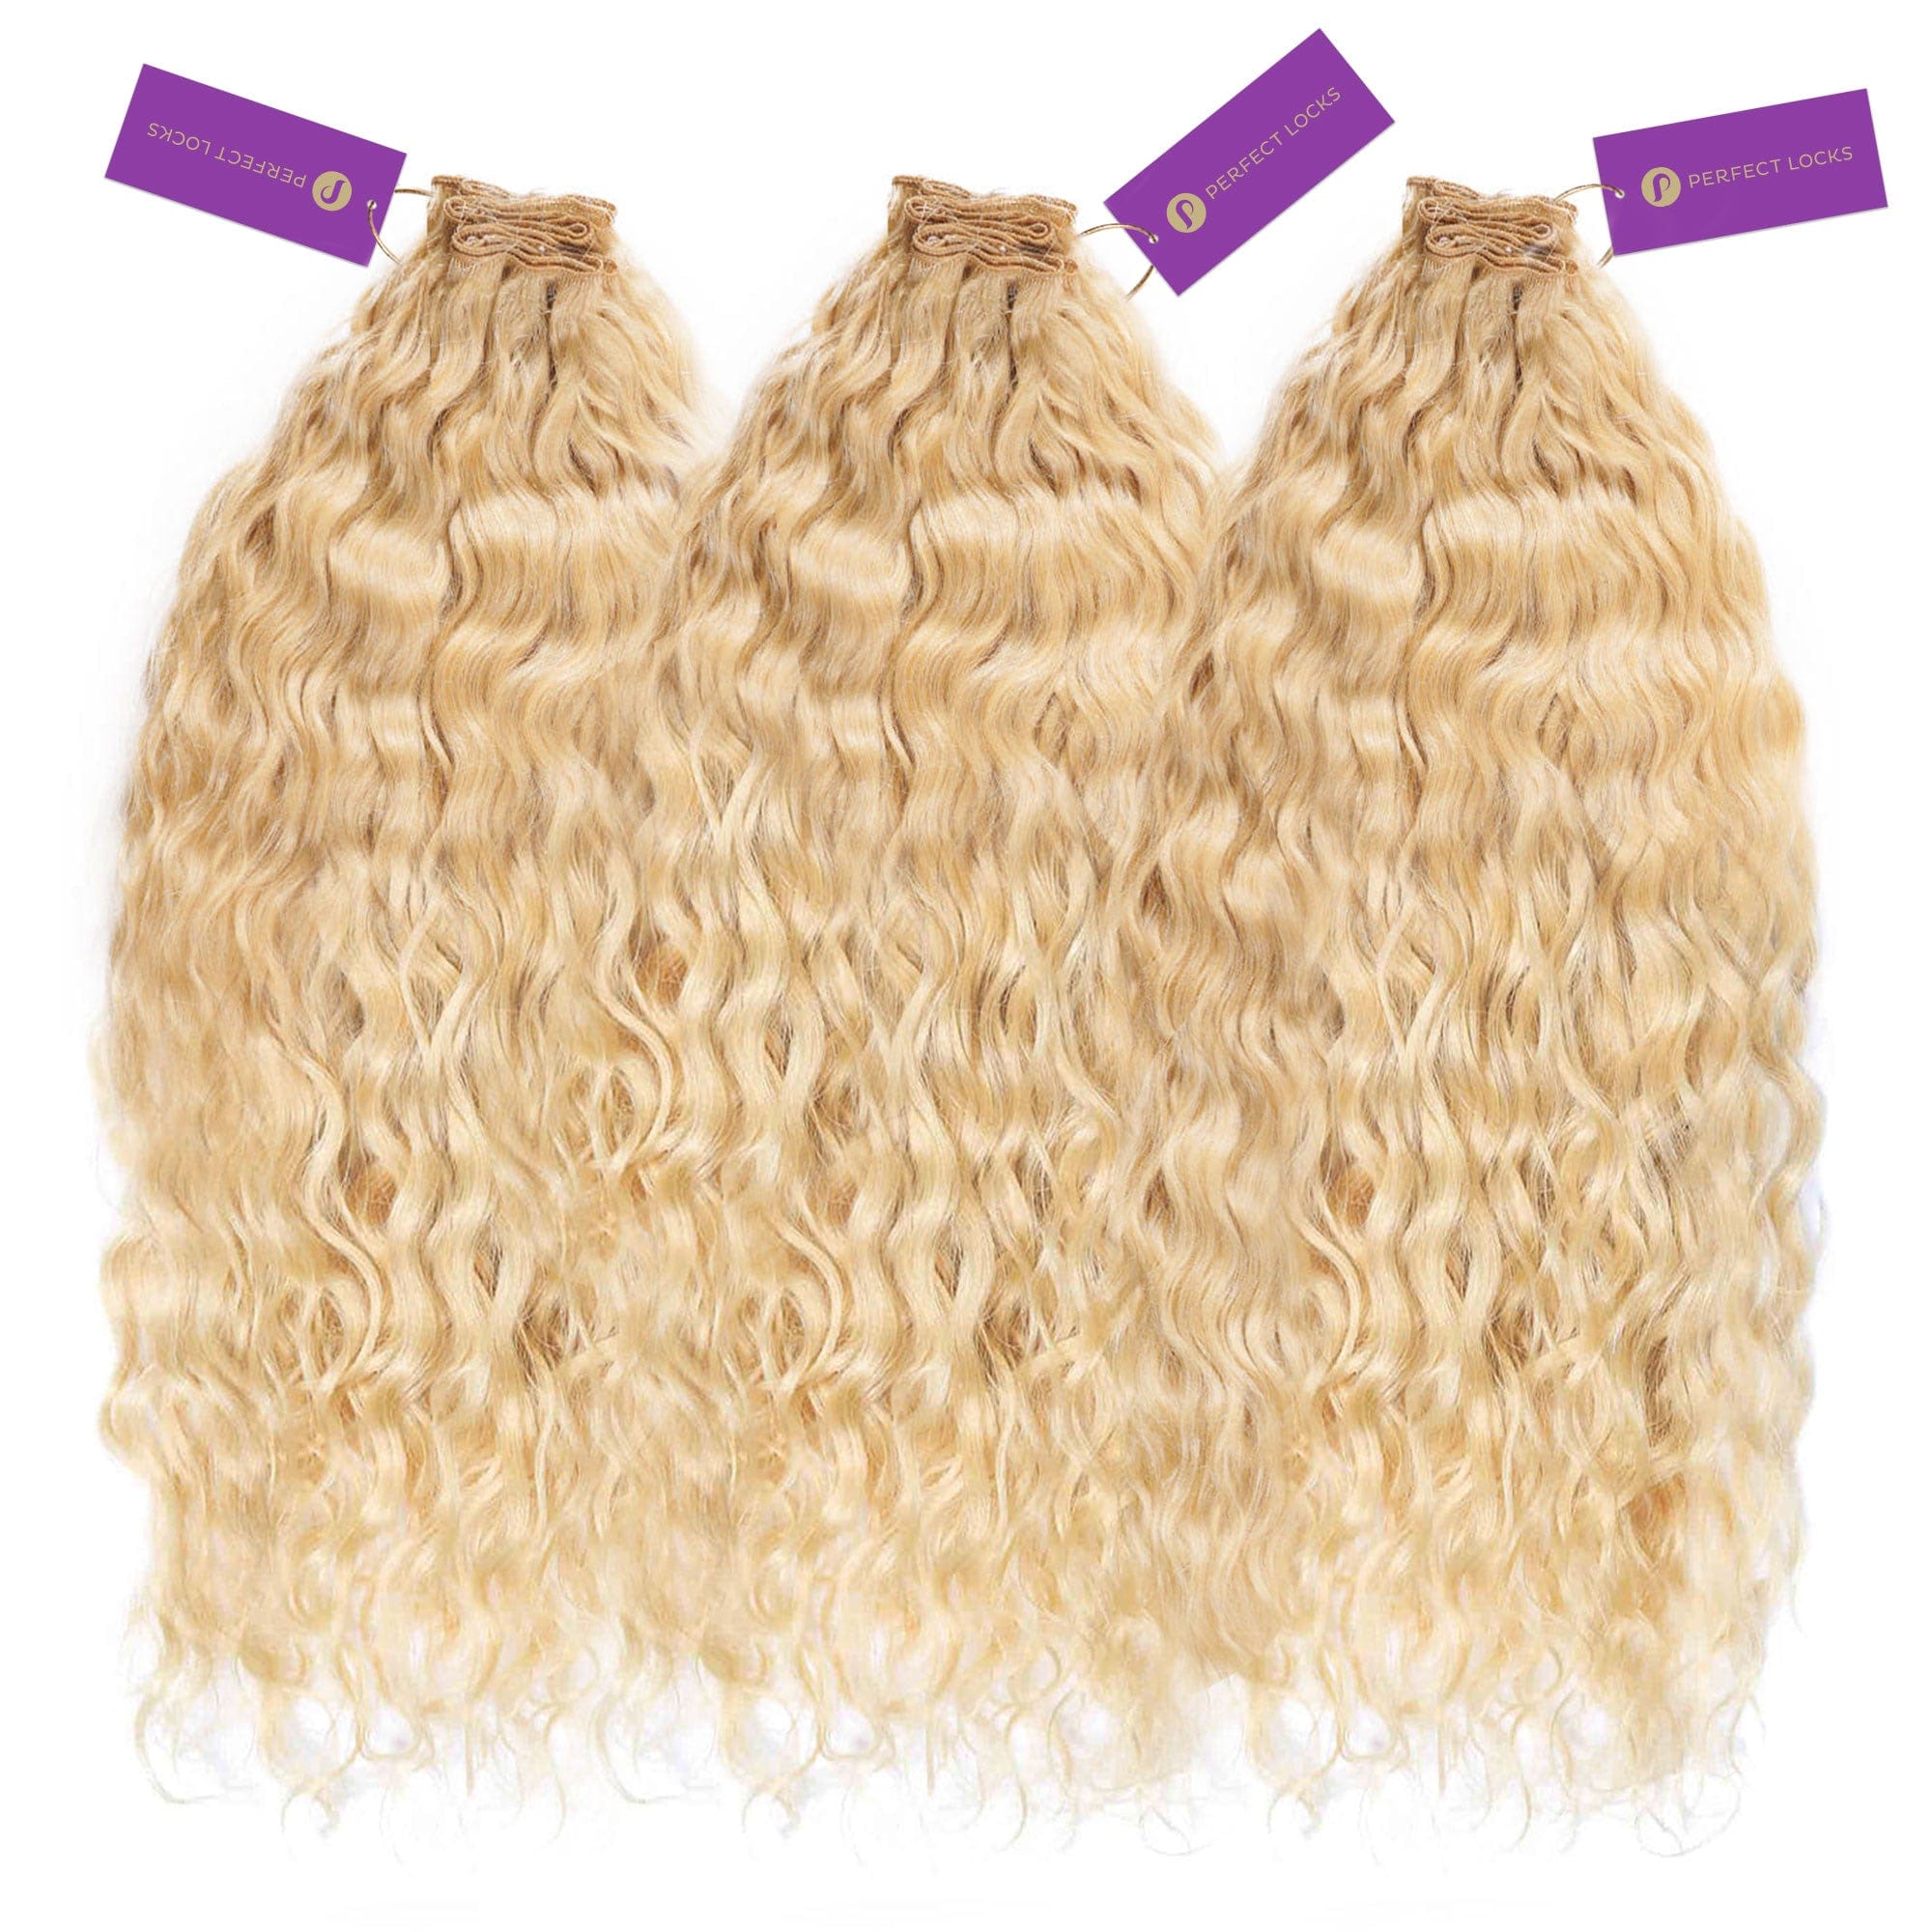 Curly Hand-Tied Rows (2oz) – Perfect Locks